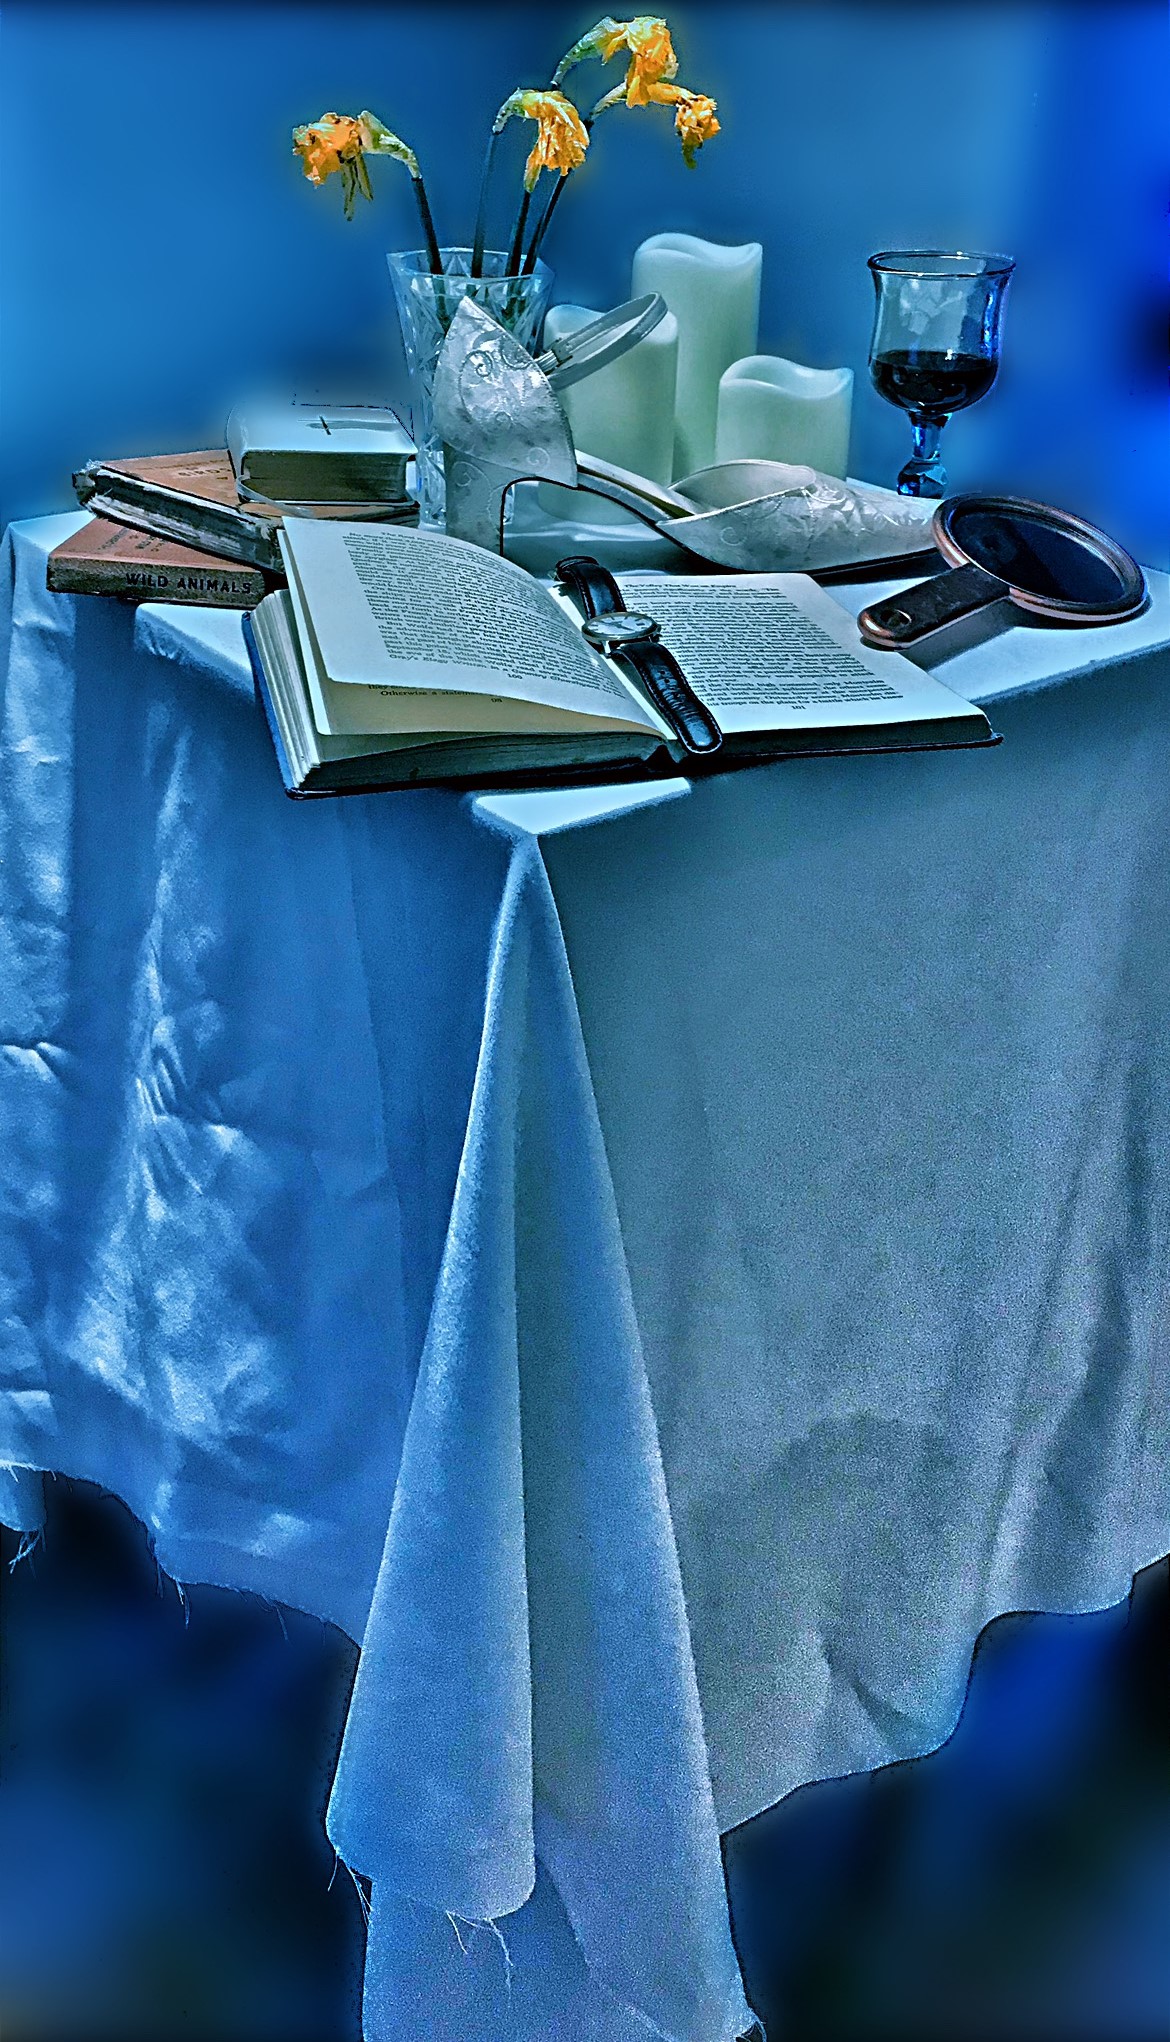 Staged photograph of heirlooms and sentimental items